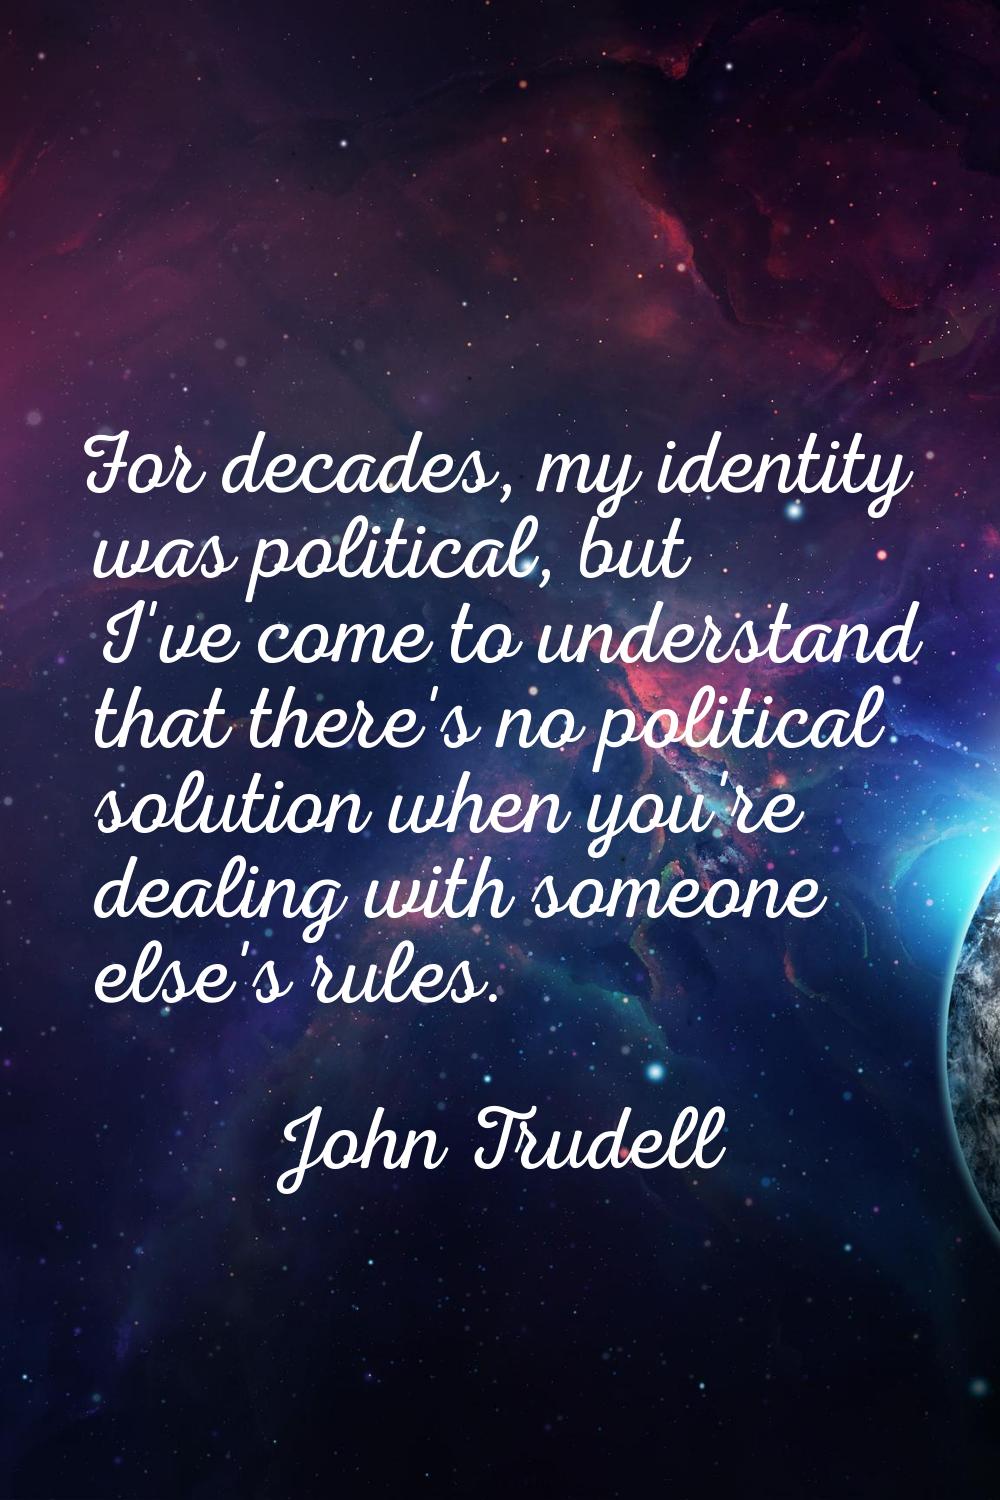 For decades, my identity was political, but I've come to understand that there's no political solut